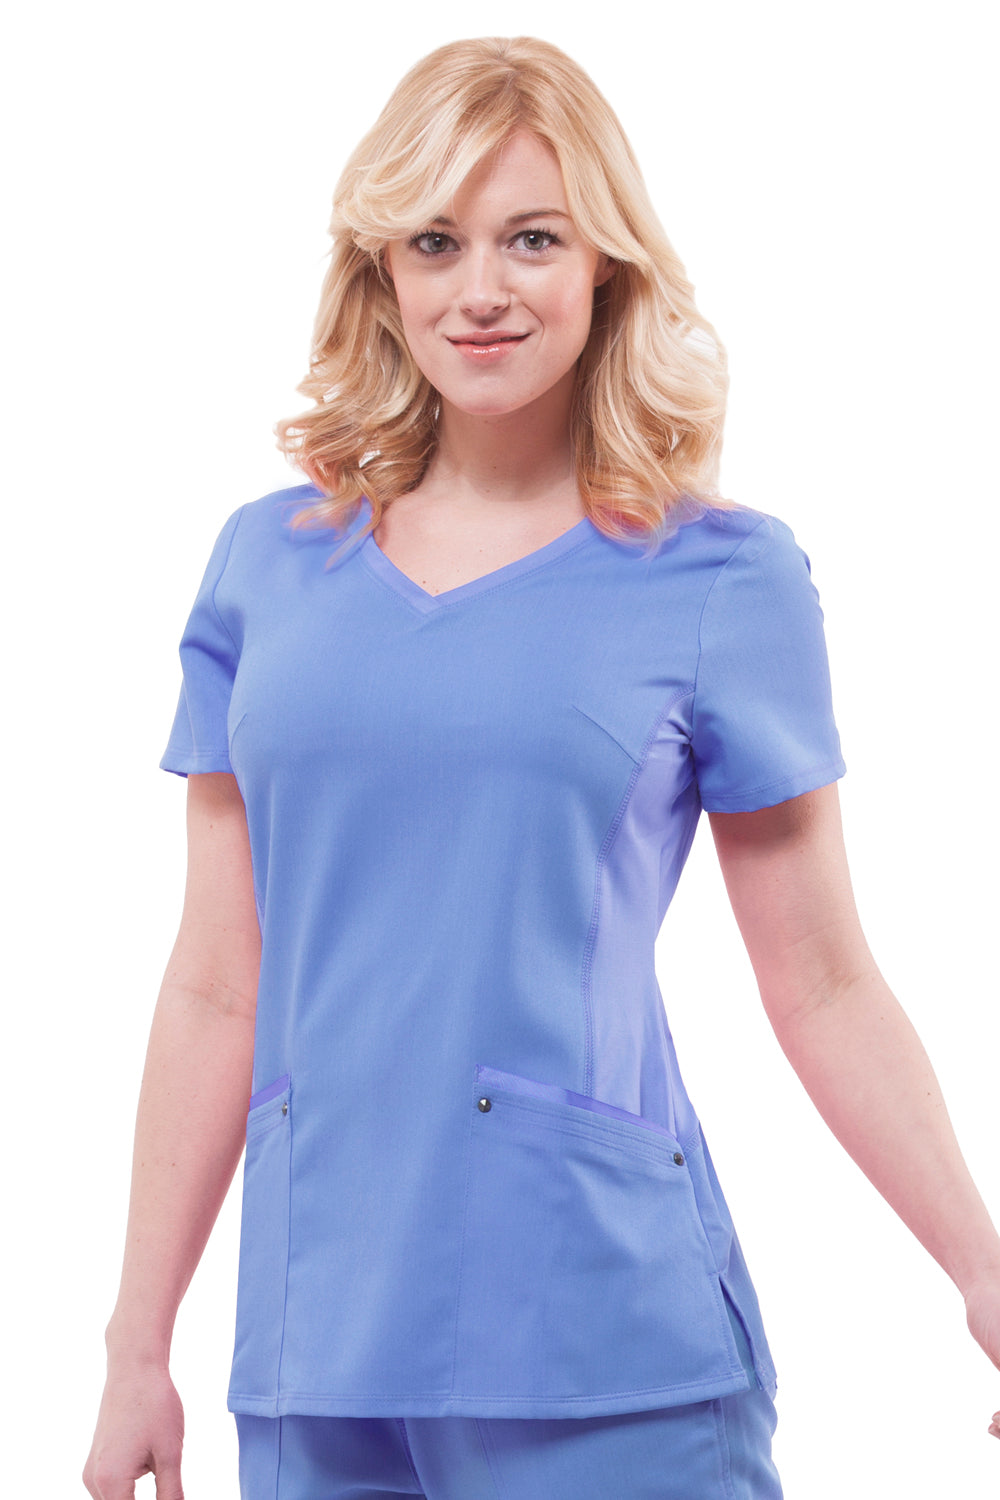 Healing Hands Purple Label Juliet Scrub Top in Ceil at Parker's Clothing and Shoes.